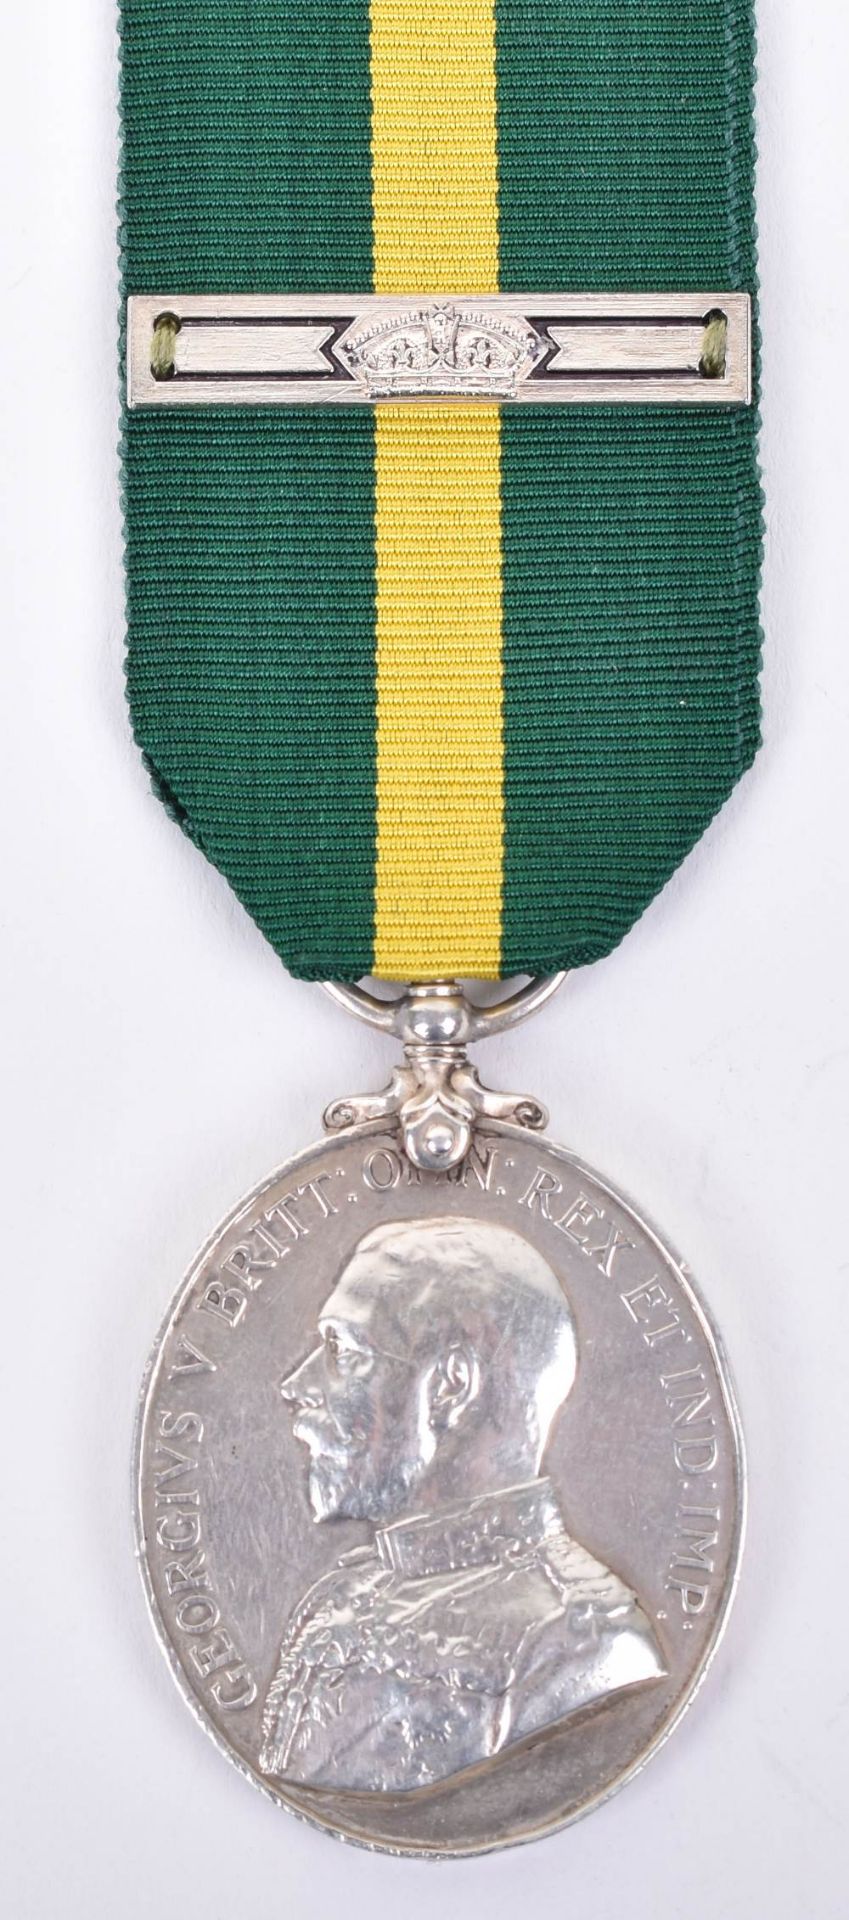 Rare George V Territorial Force Efficiency Medal with Bar 9th London Regiment